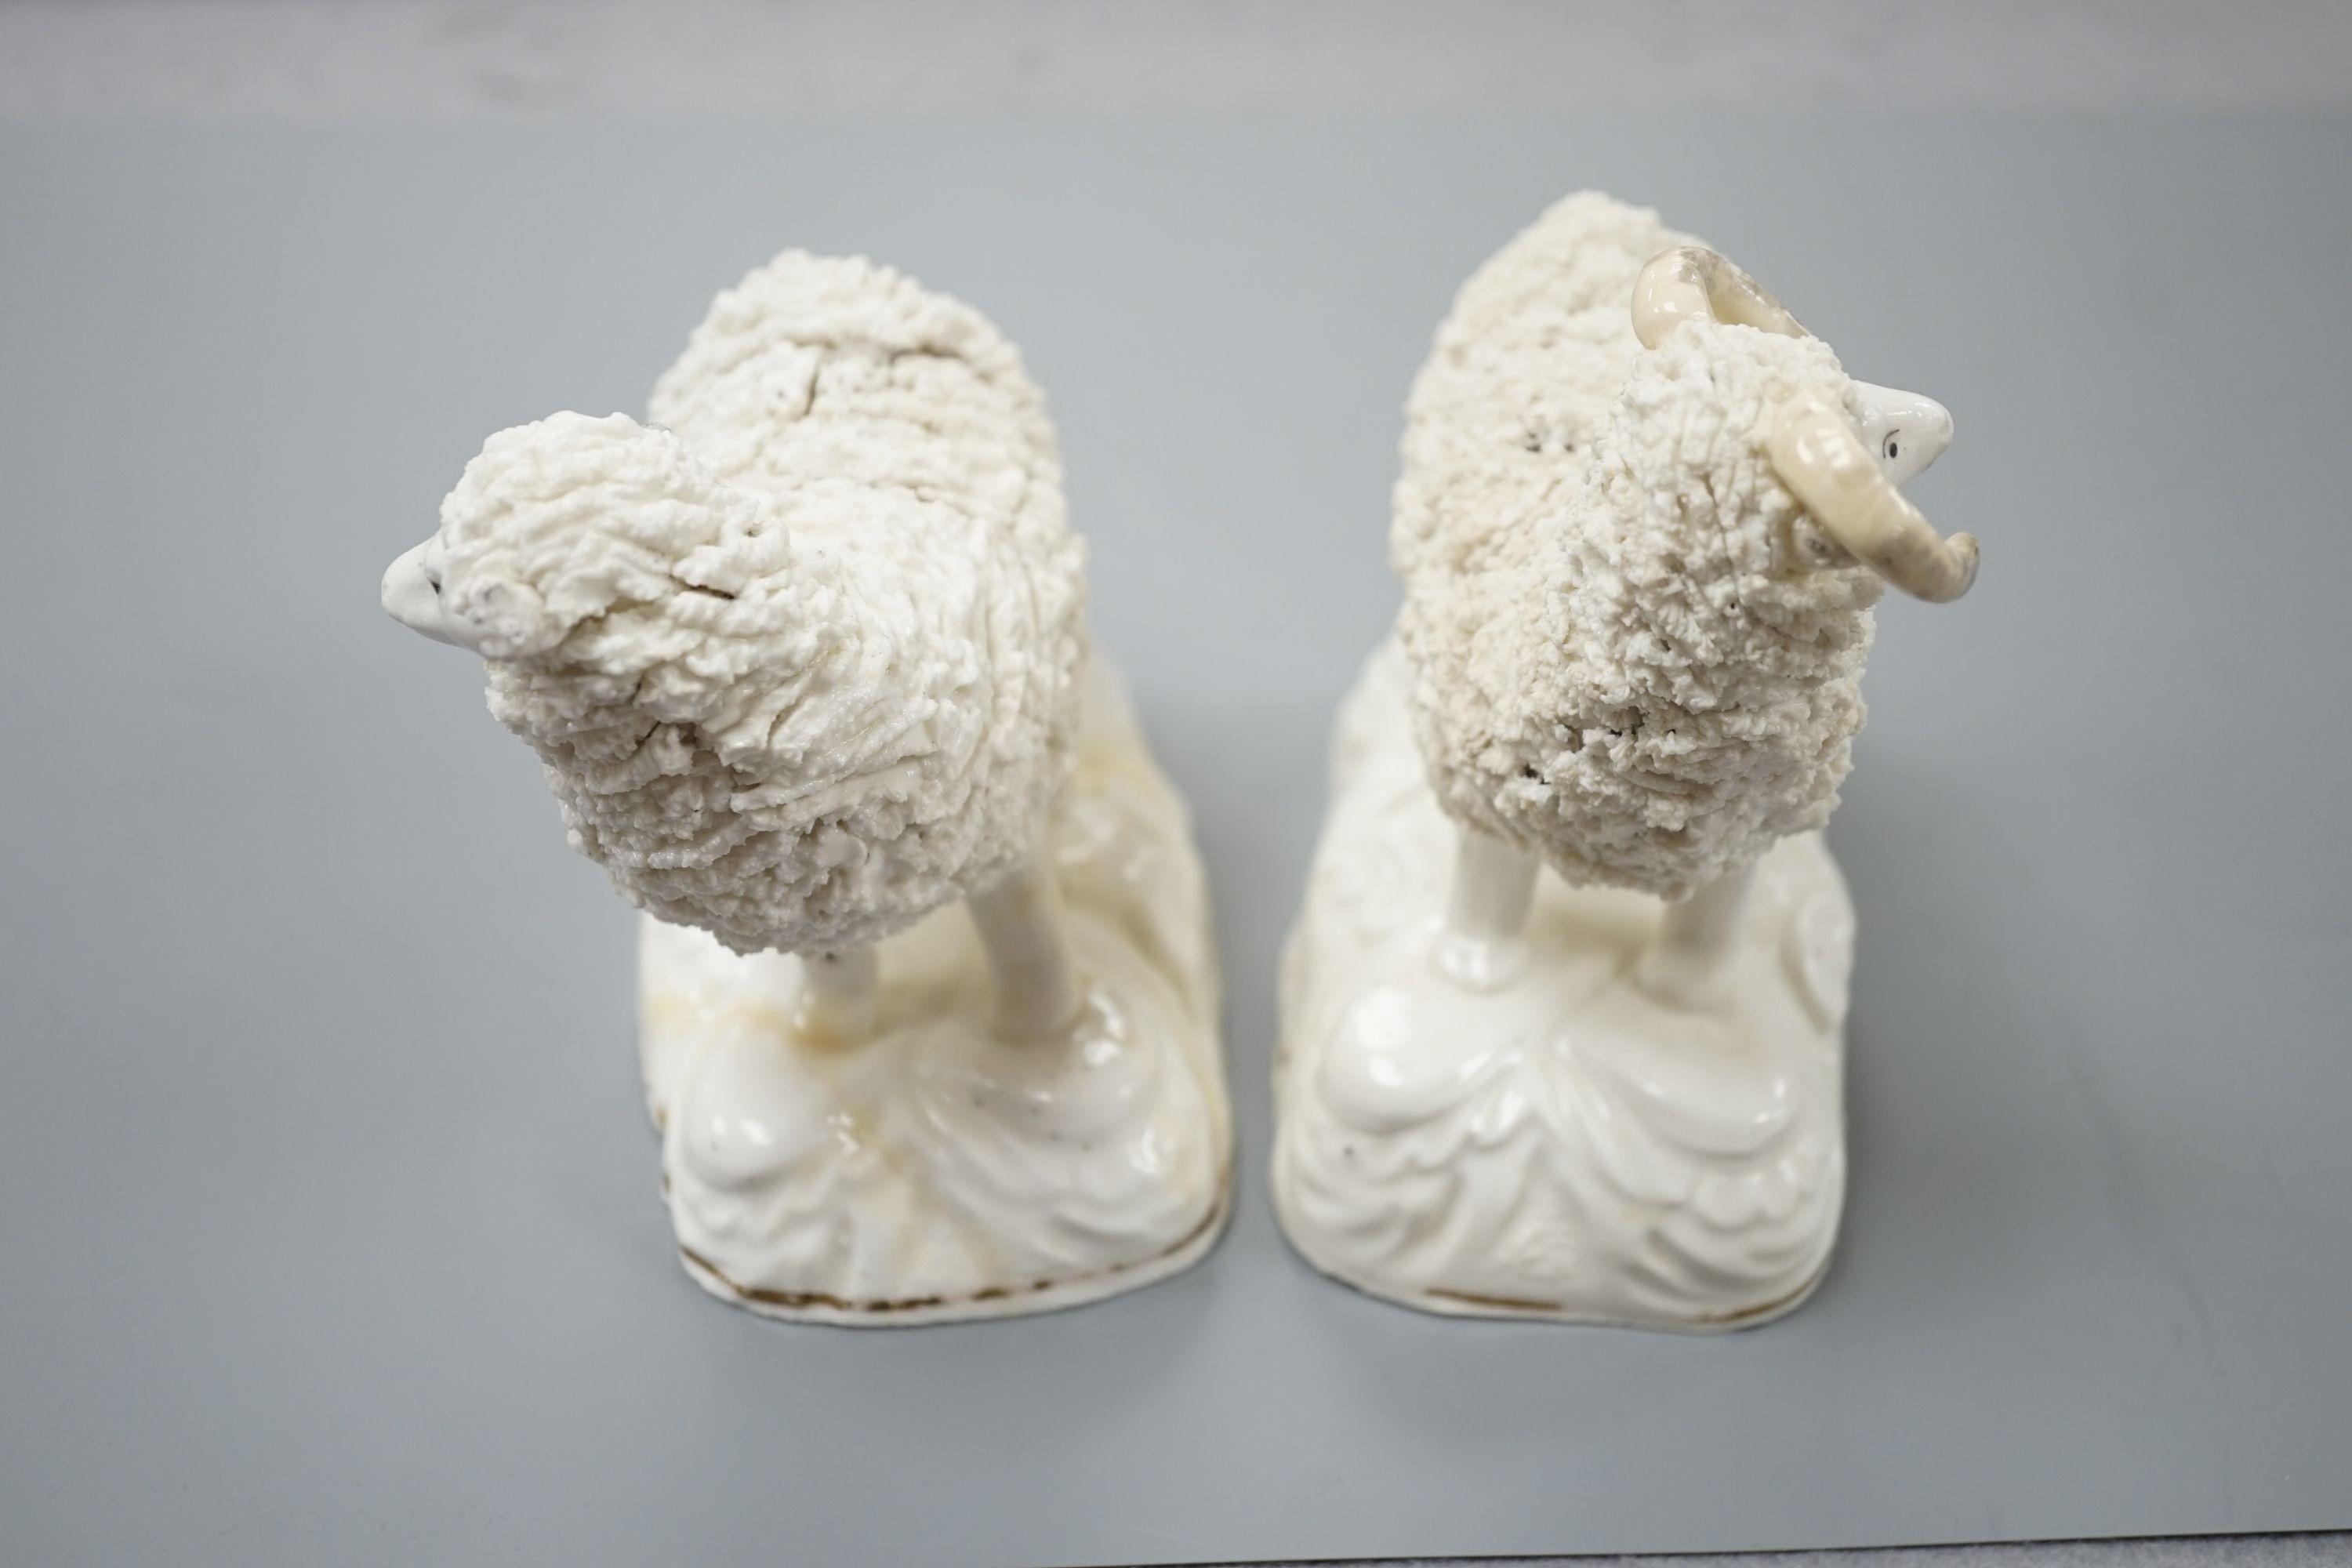 A pair of large Staffordshire porcelain figures of a ewe and a ram, c.1835–50, 10.5 and 11 cm high, Provenance: Dennis G.Rice collection